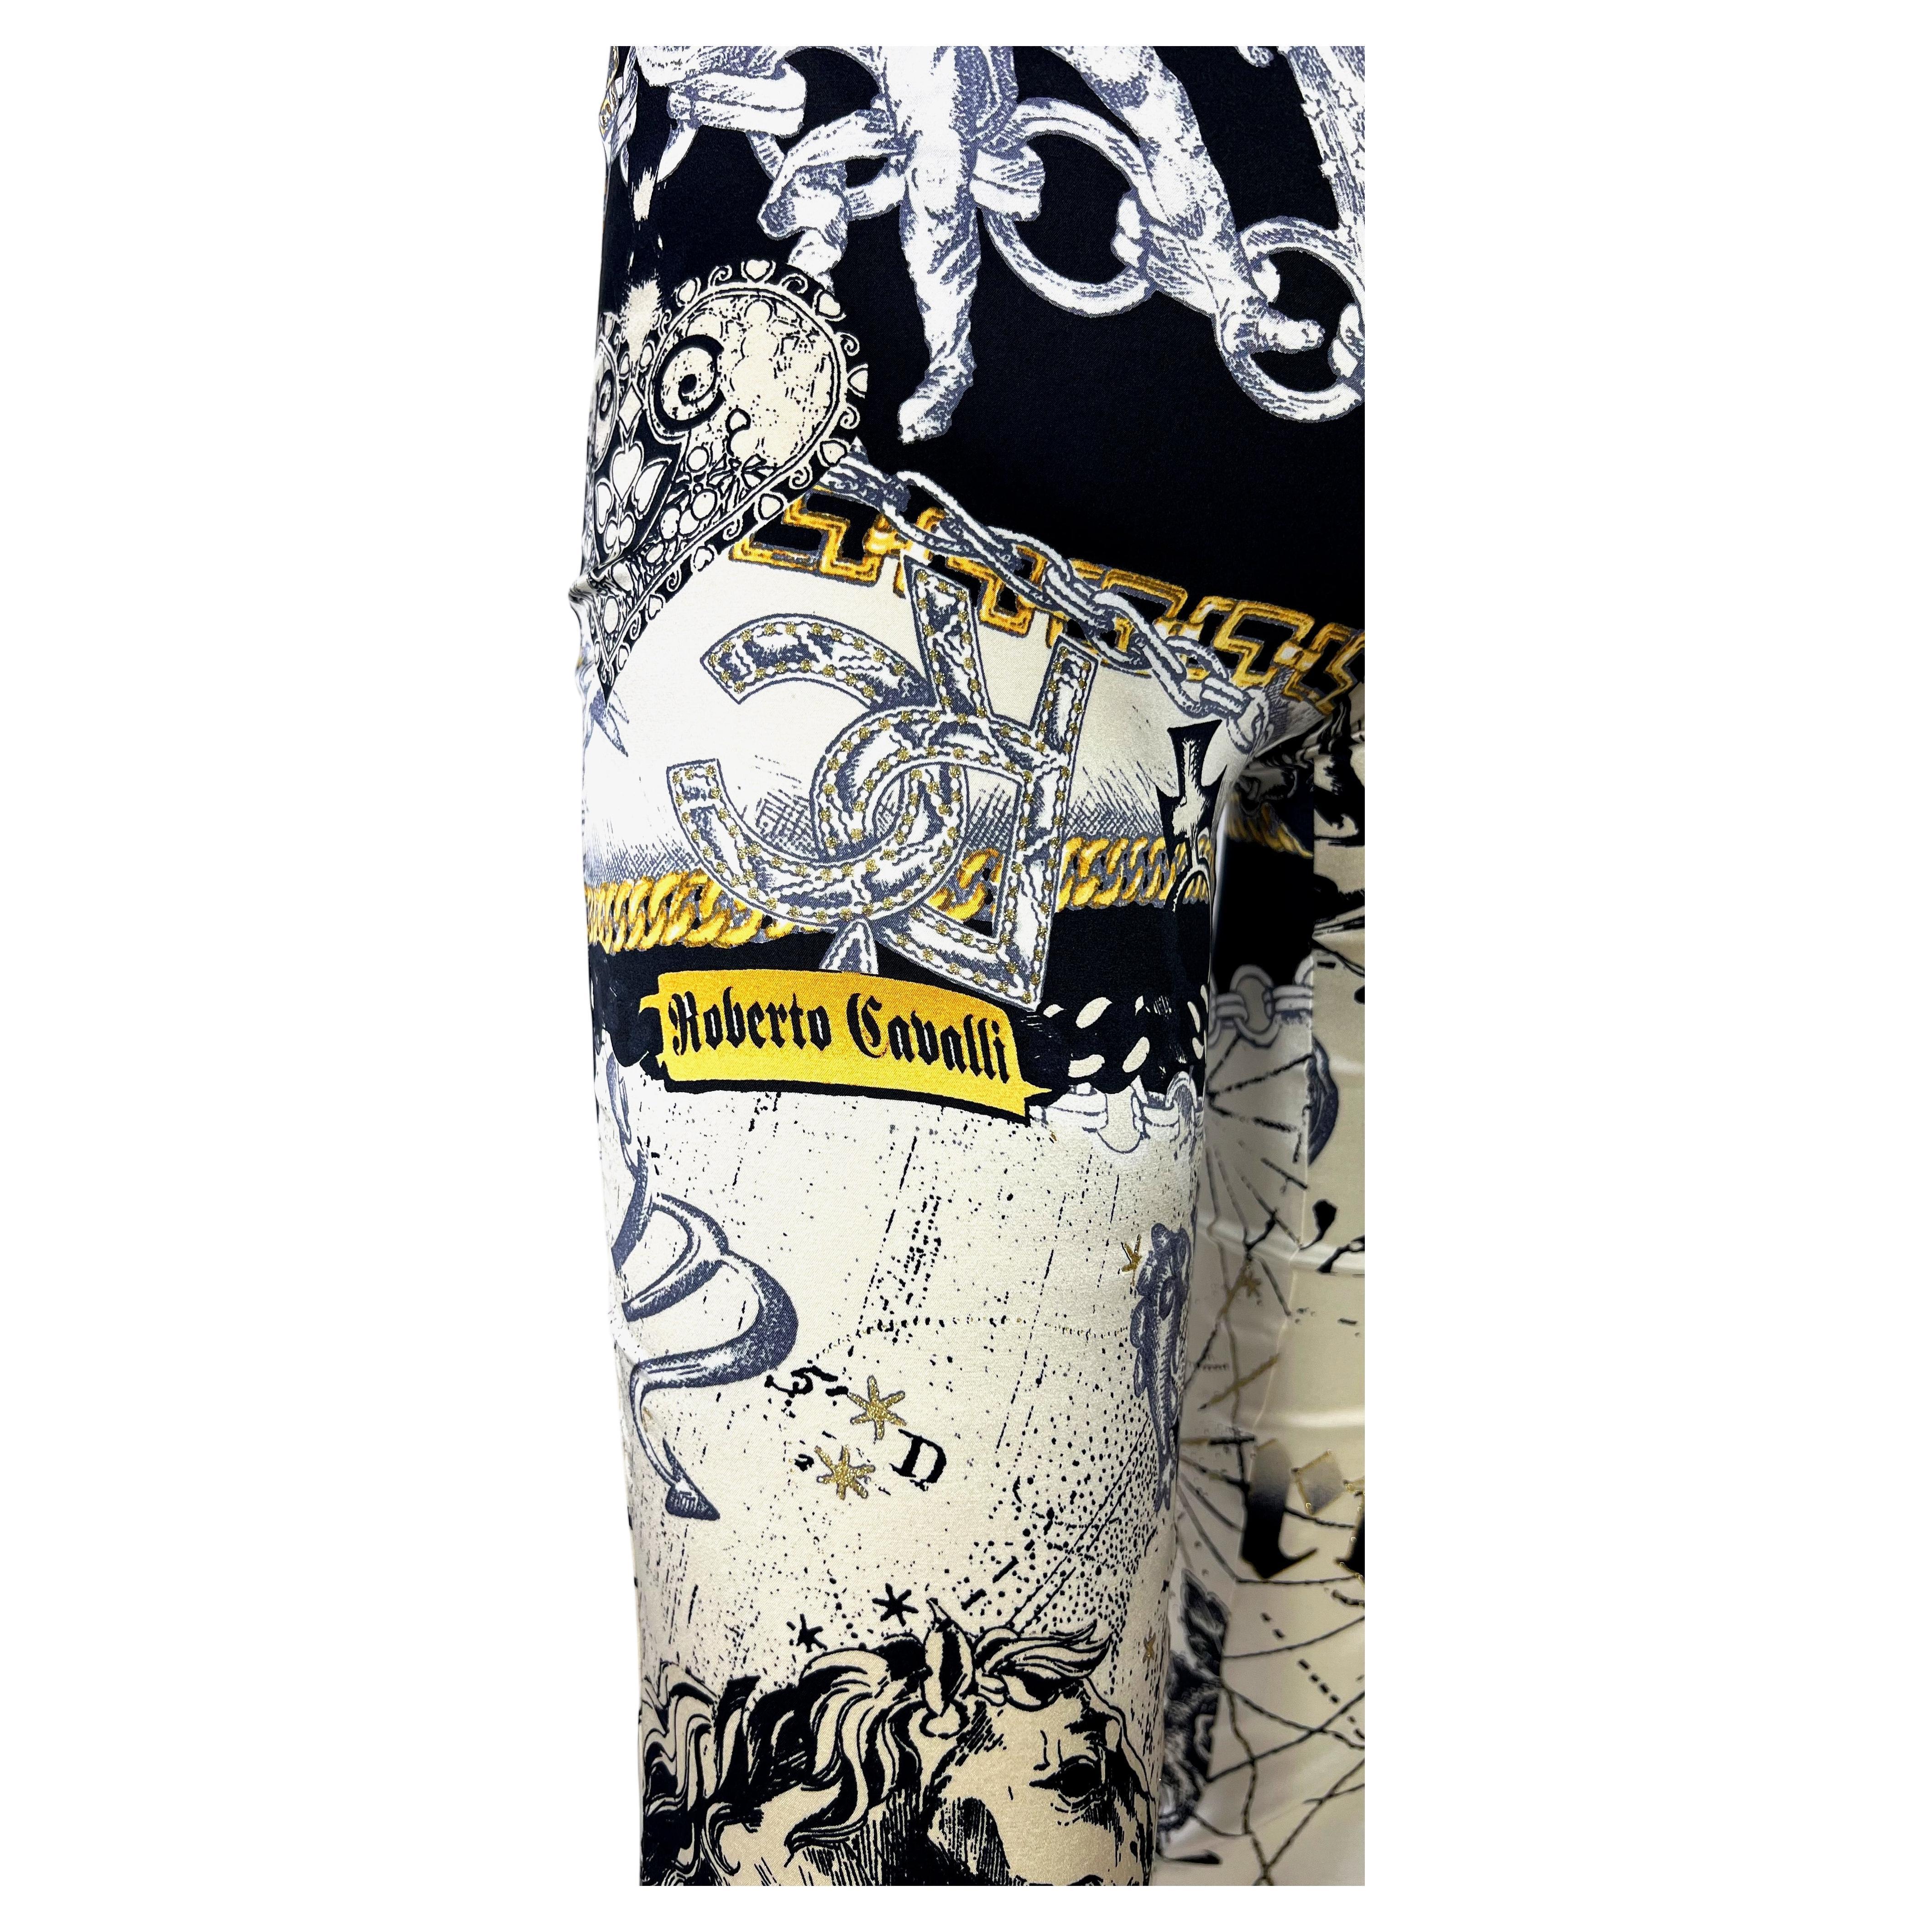 Presenting a pair of stunning astrology print silk Roberto Cavalli boot cut pants, designed by Roberto Cavalli. From 2003, this sought-after print features constellations and depicts some of the horoscope signs. A stunning piece of vintage Roberto